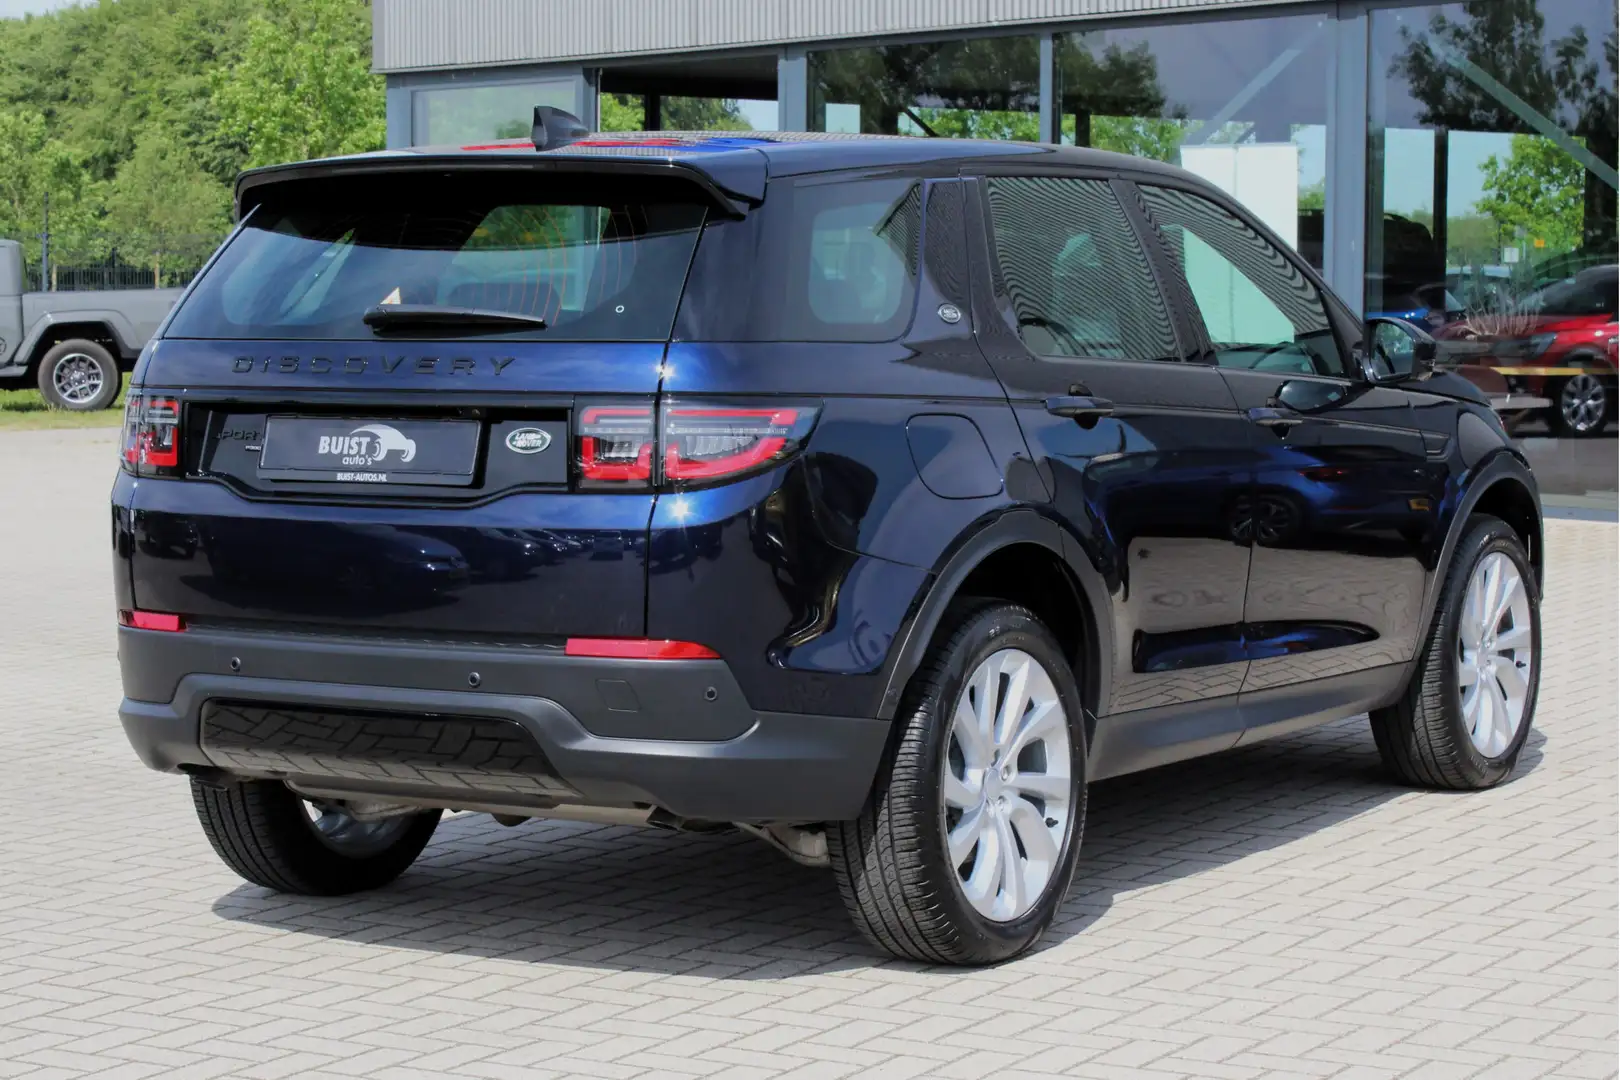 Land Rover Discovery Sport P300e 1.5 S AWD PANO LEER 20" LED DAB 11921KM! NL- Blauw - 2